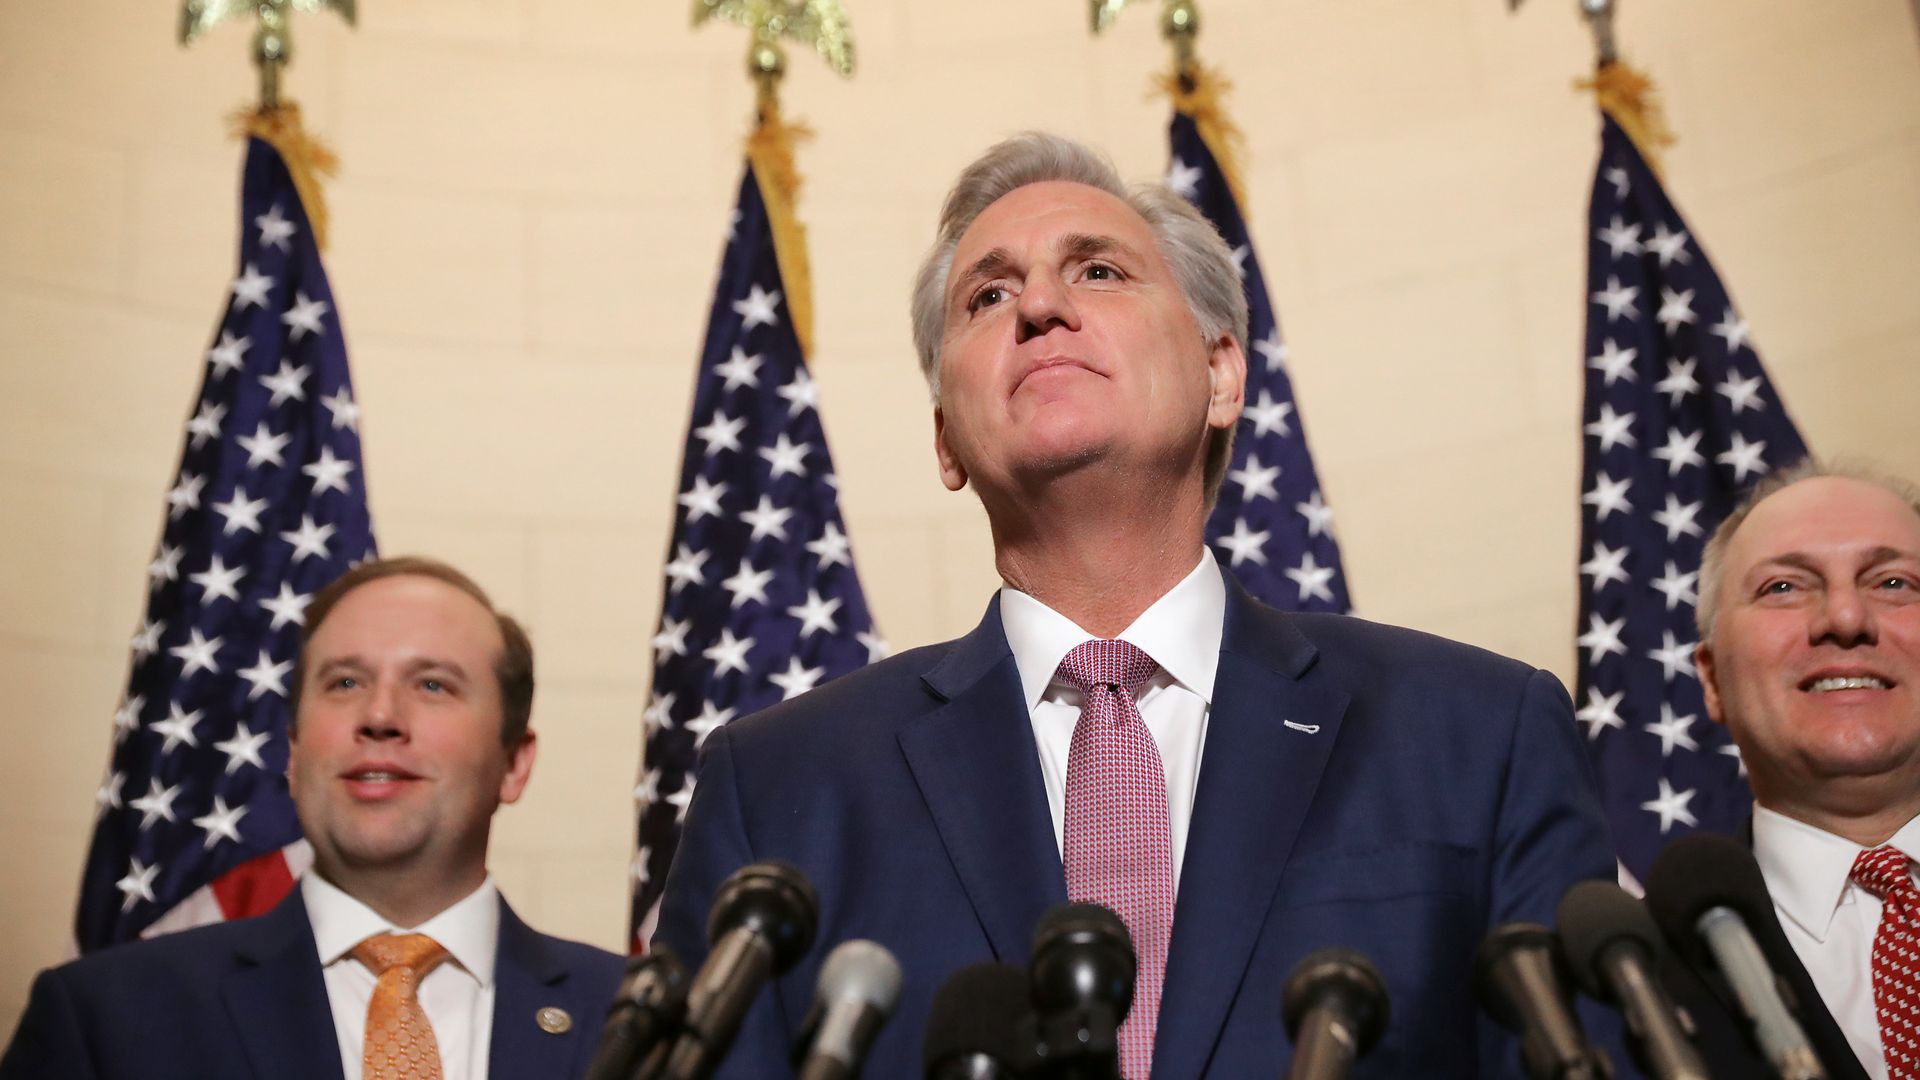 Rep. Jason Smith is seen with House Minority Leader Kevin McCarthy and Minority Whip Steve Scalise during a news conference.